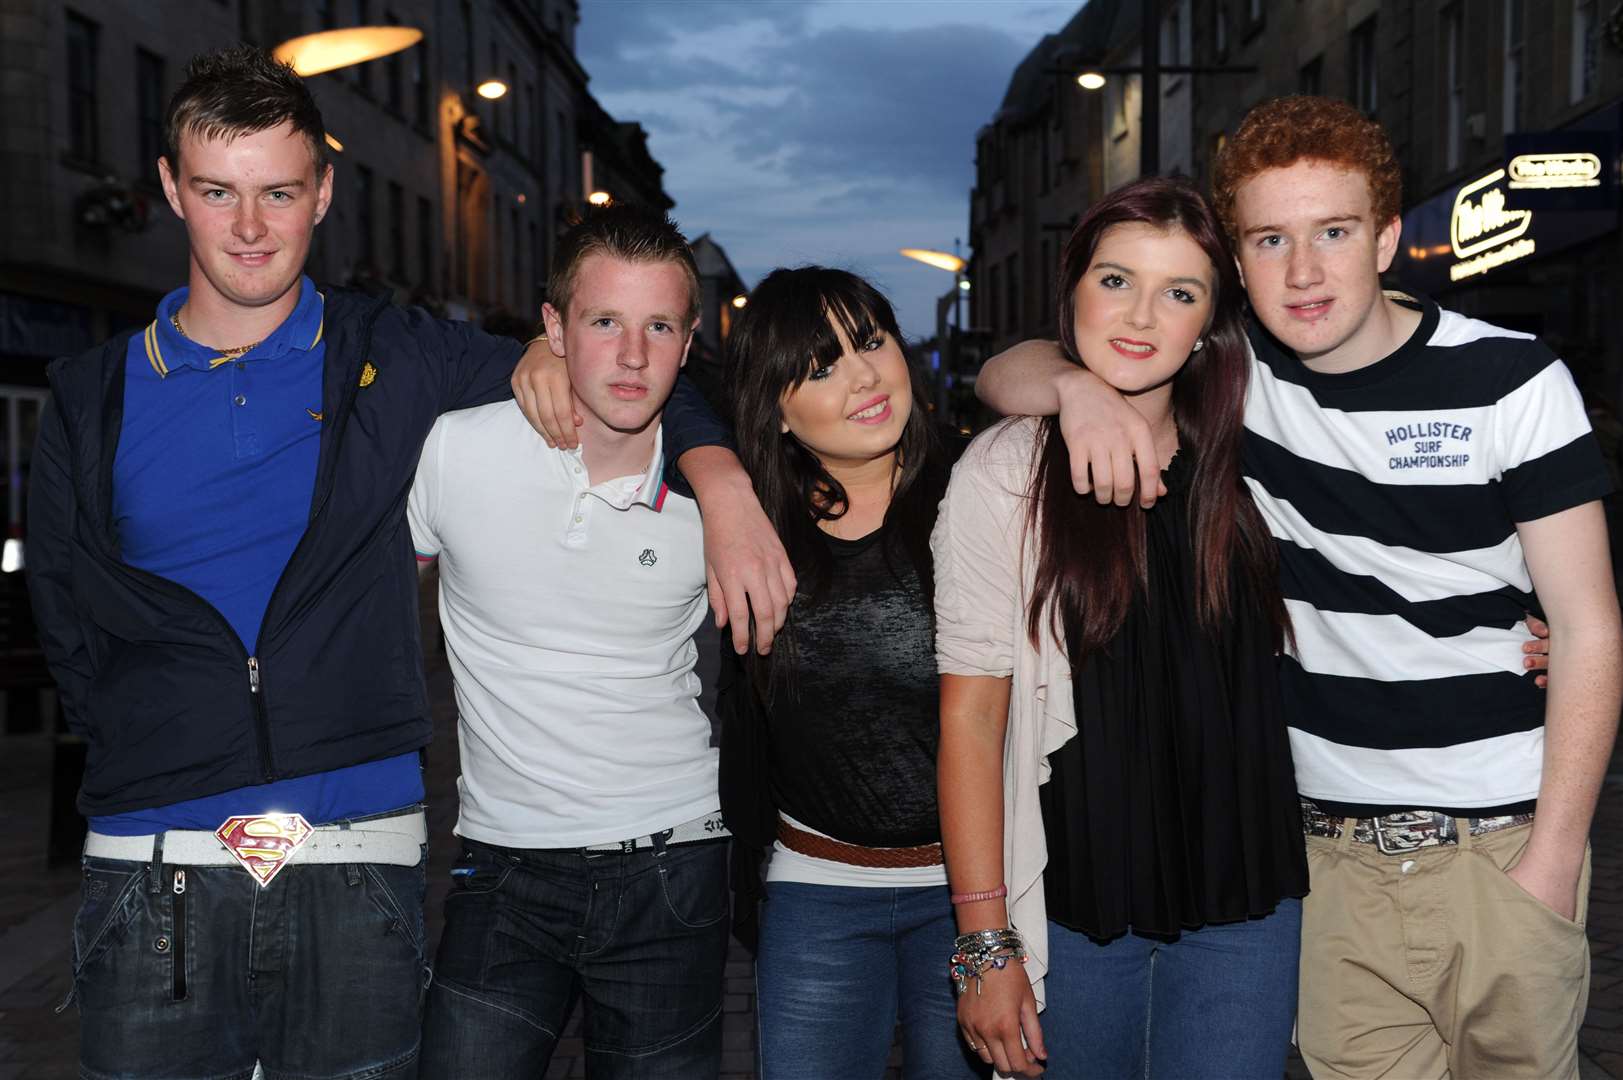 Max Carty, Lewis Forbes, Iona Bell, Lauren Glass and Max Manser.